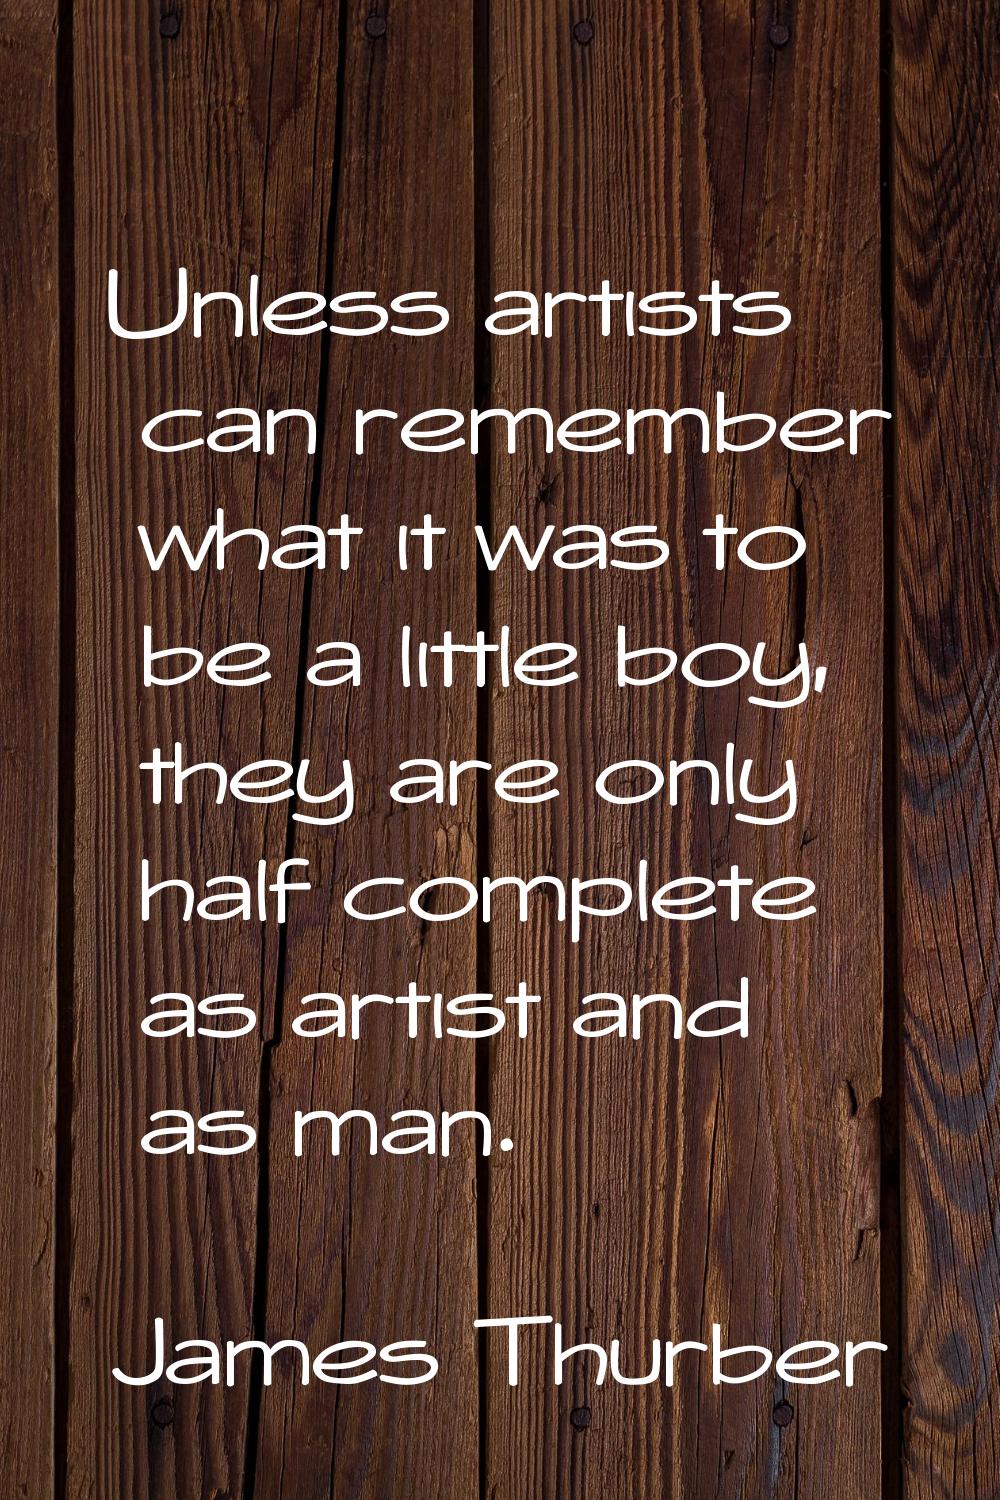 Unless artists can remember what it was to be a little boy, they are only half complete as artist a